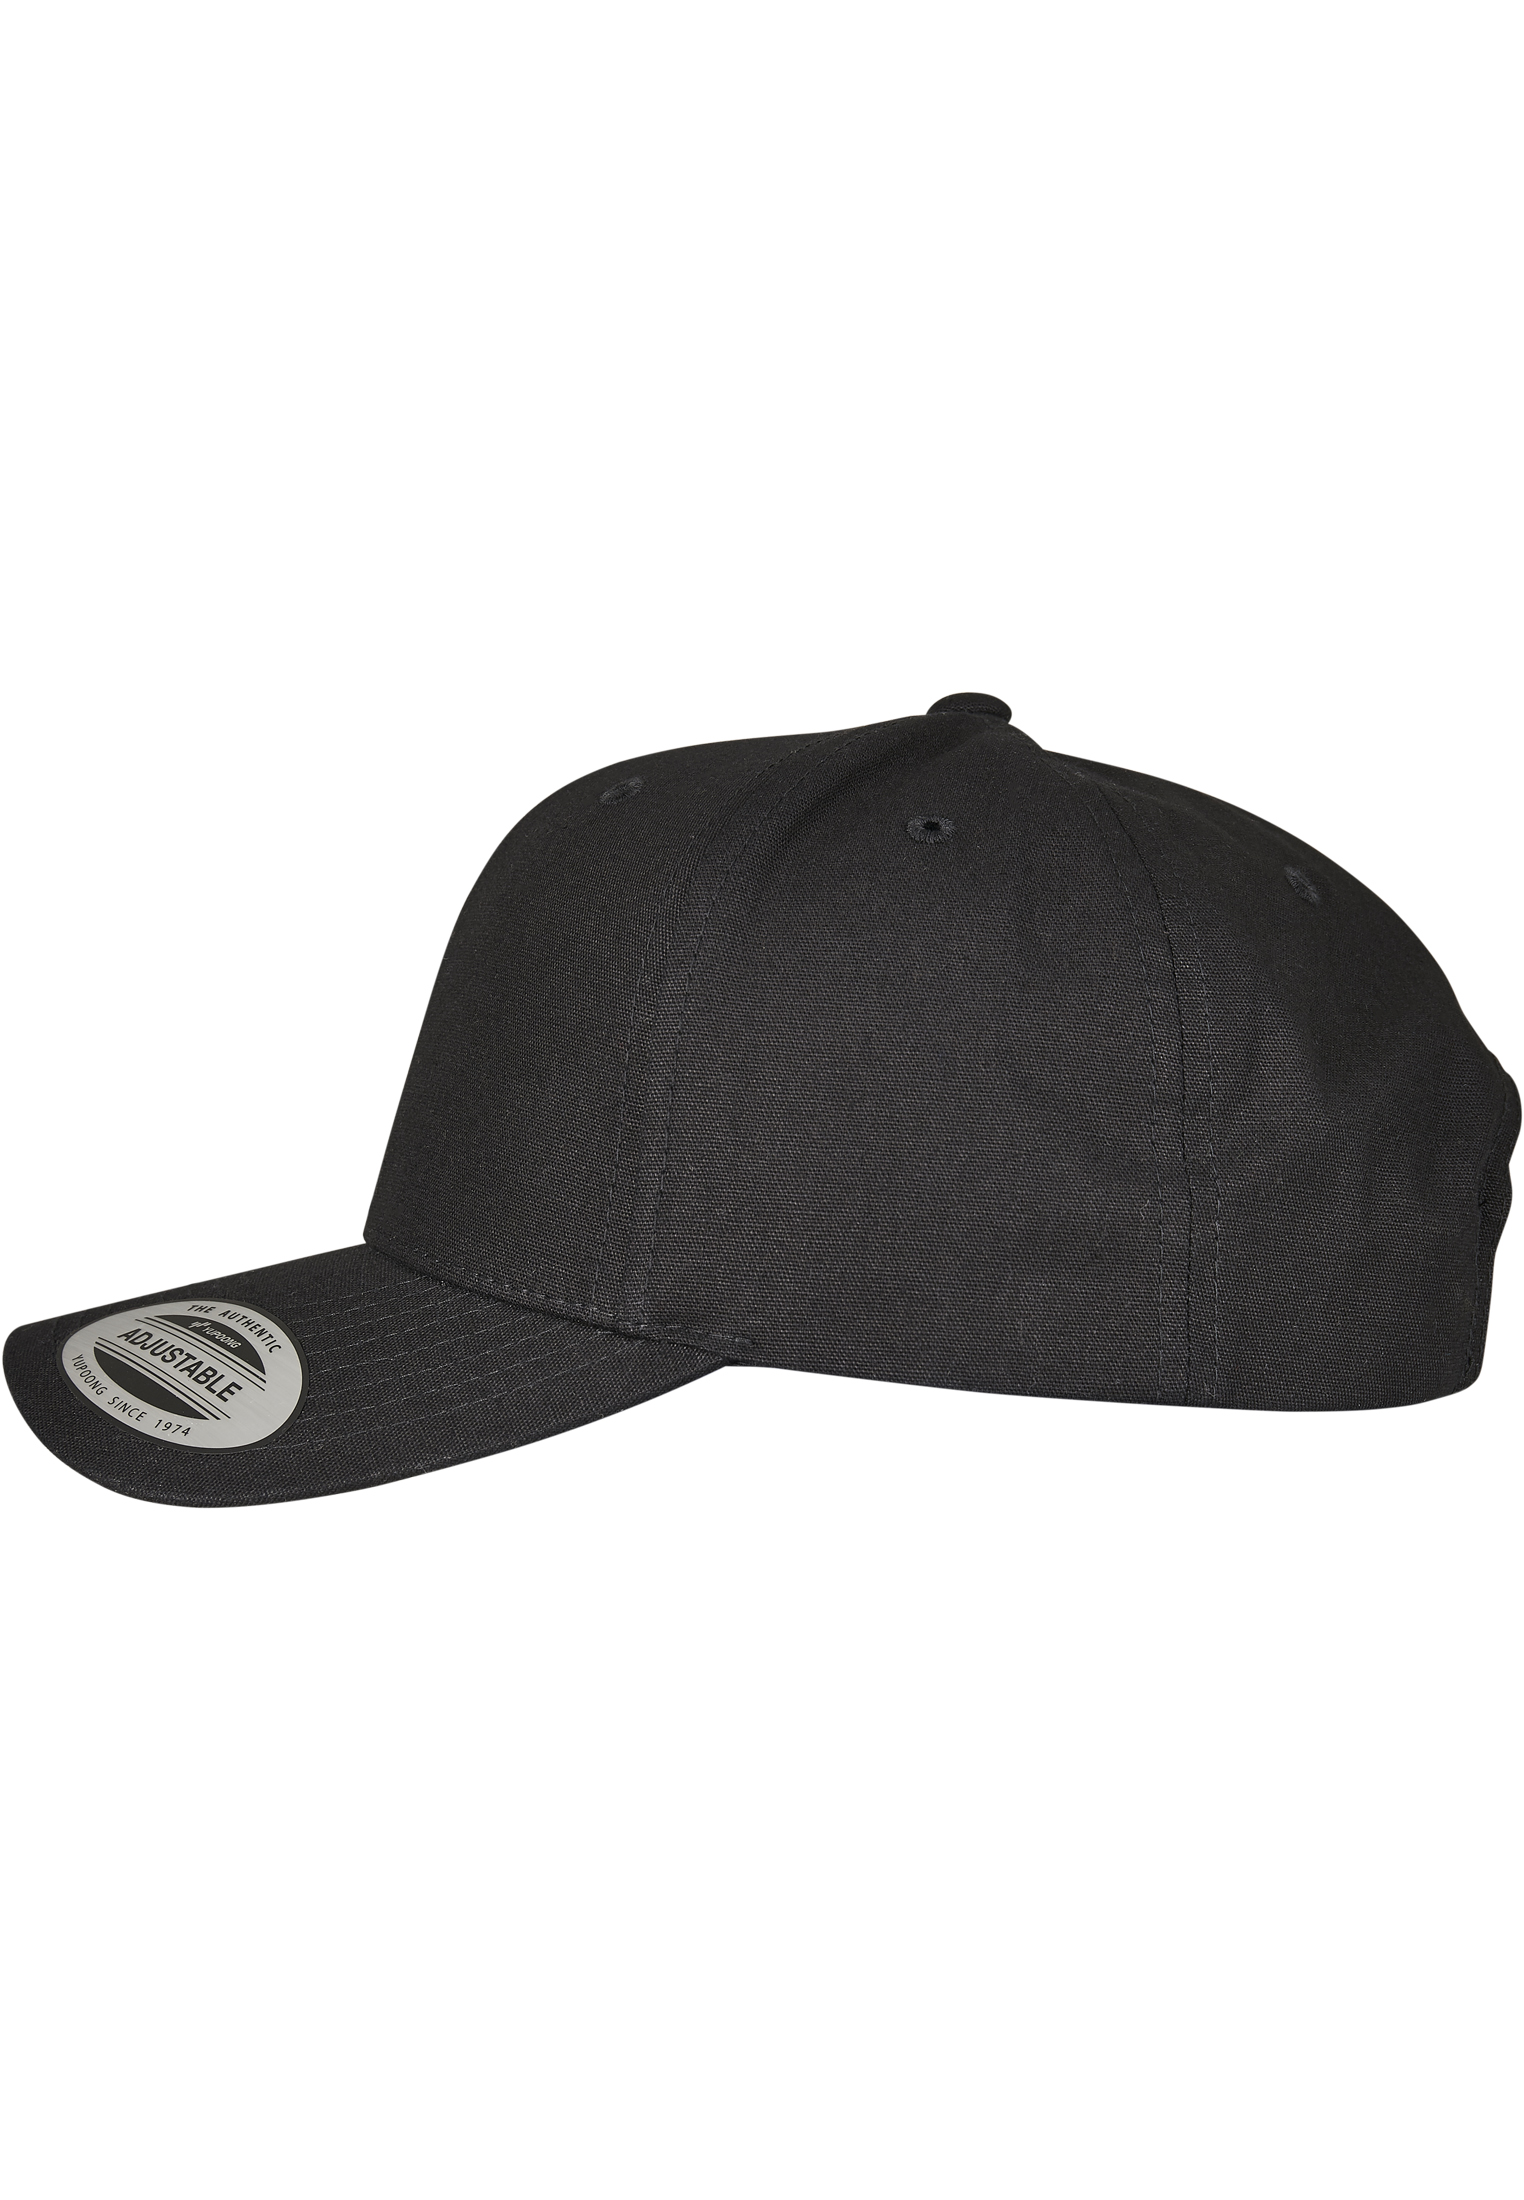 Curved 6-Panel Metal Snap-7708MS